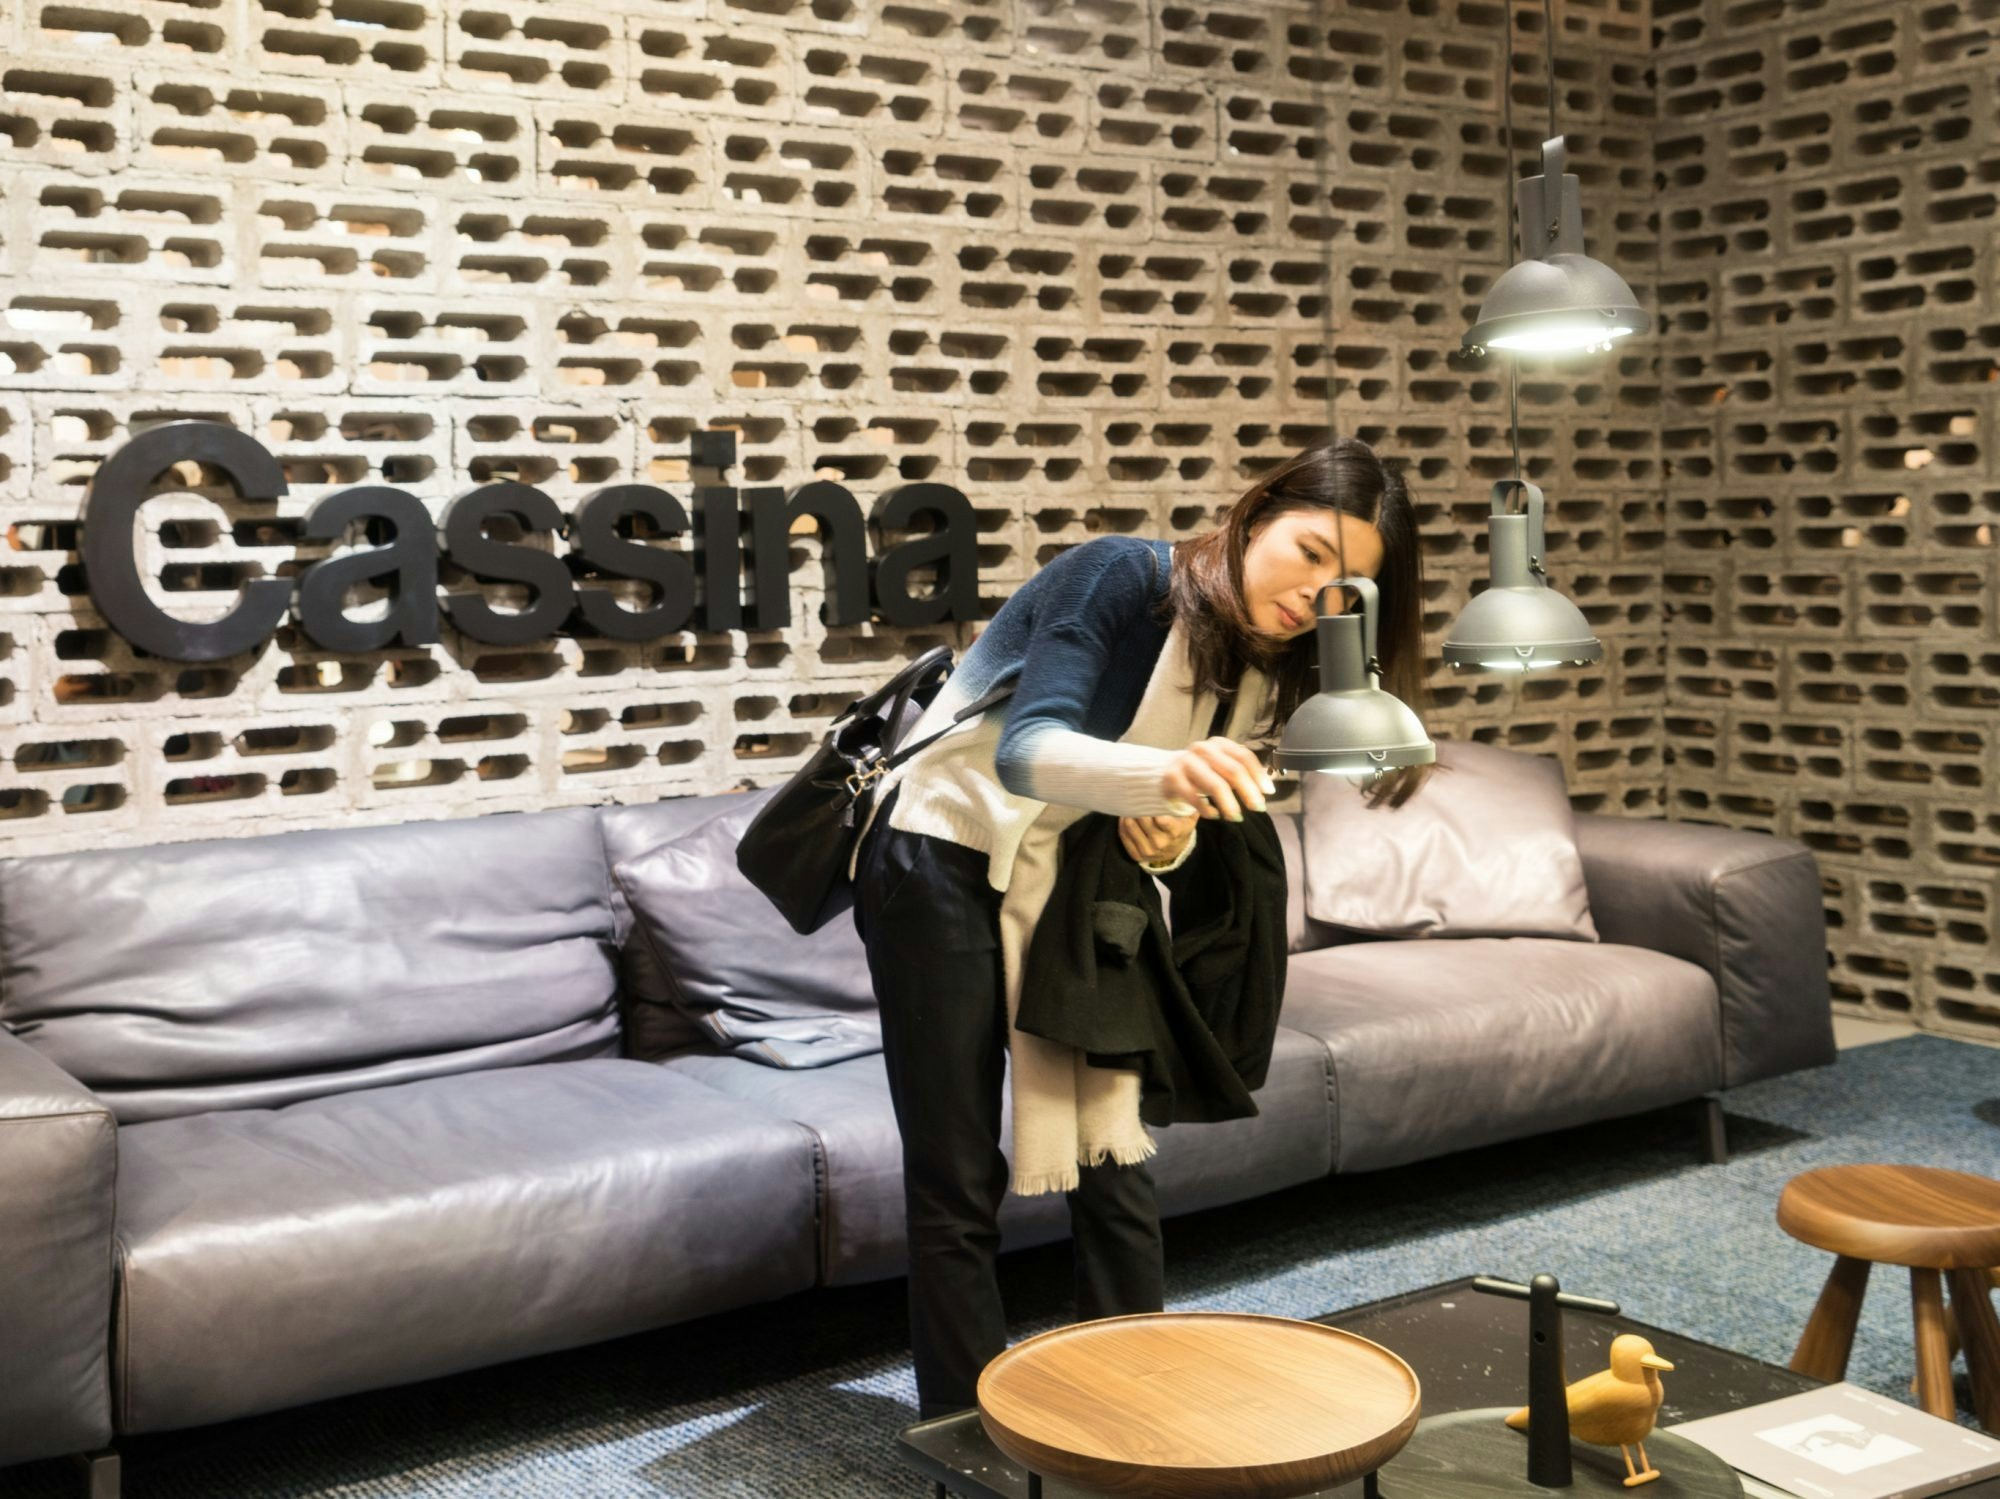 A guest inspects furniture in a display at Design Shanghai 2016. (Courtesy Photo)